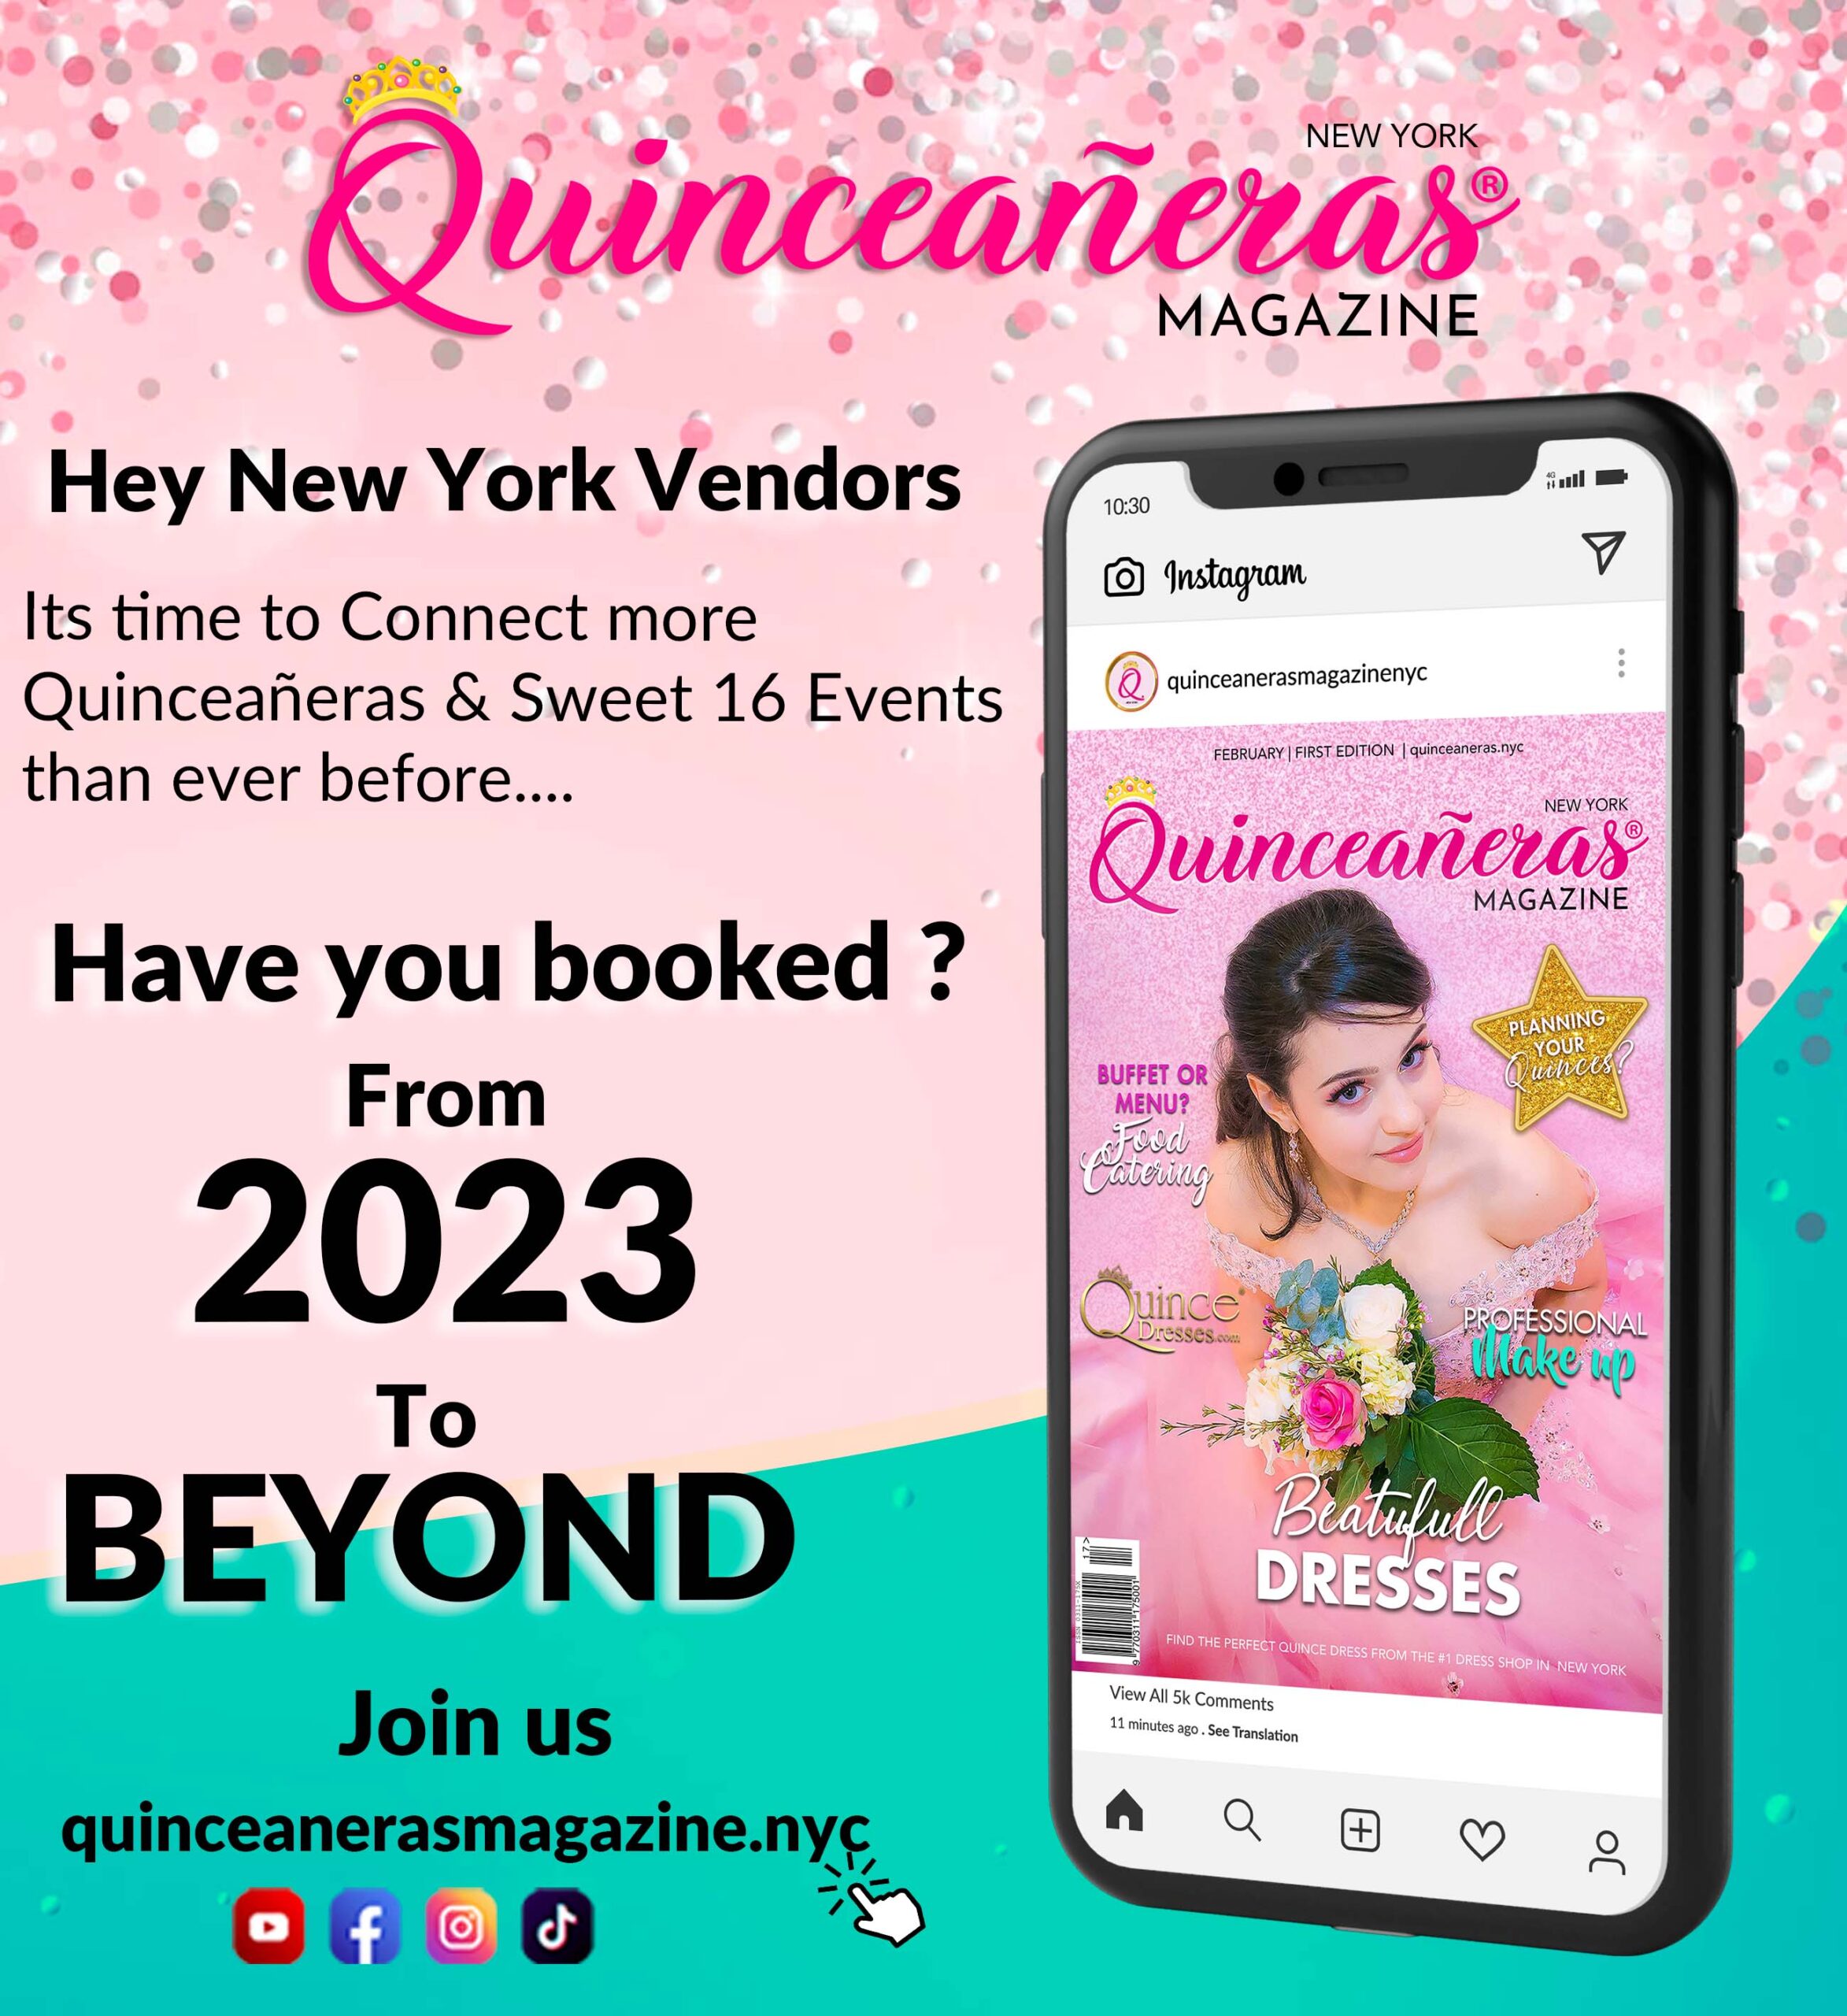 Are you a Quinceanera /  Sweet 16 vendor?